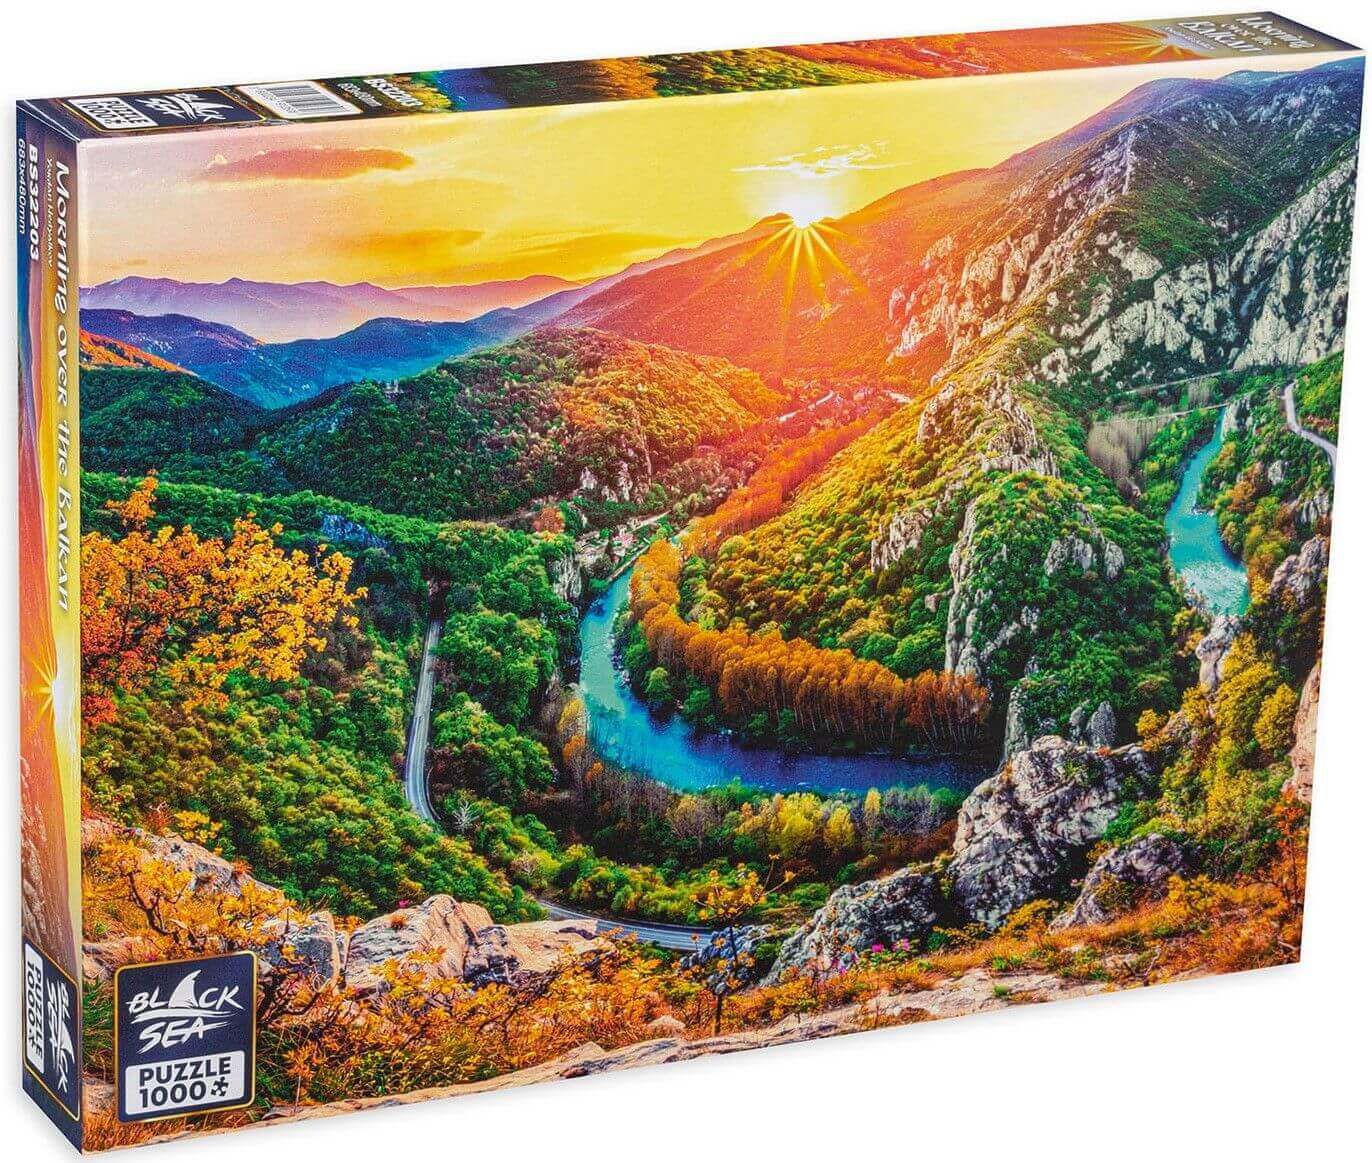 Puzzle Black Sea Premium 1000 pieces - Morning over the Balkan, Morning blooms in the Balkan mountain over the steep slopes of the picturesque Iskar gorge, at Lakatnik. The small village, huddling at the foot of the imposing rocks, is also waking up for t